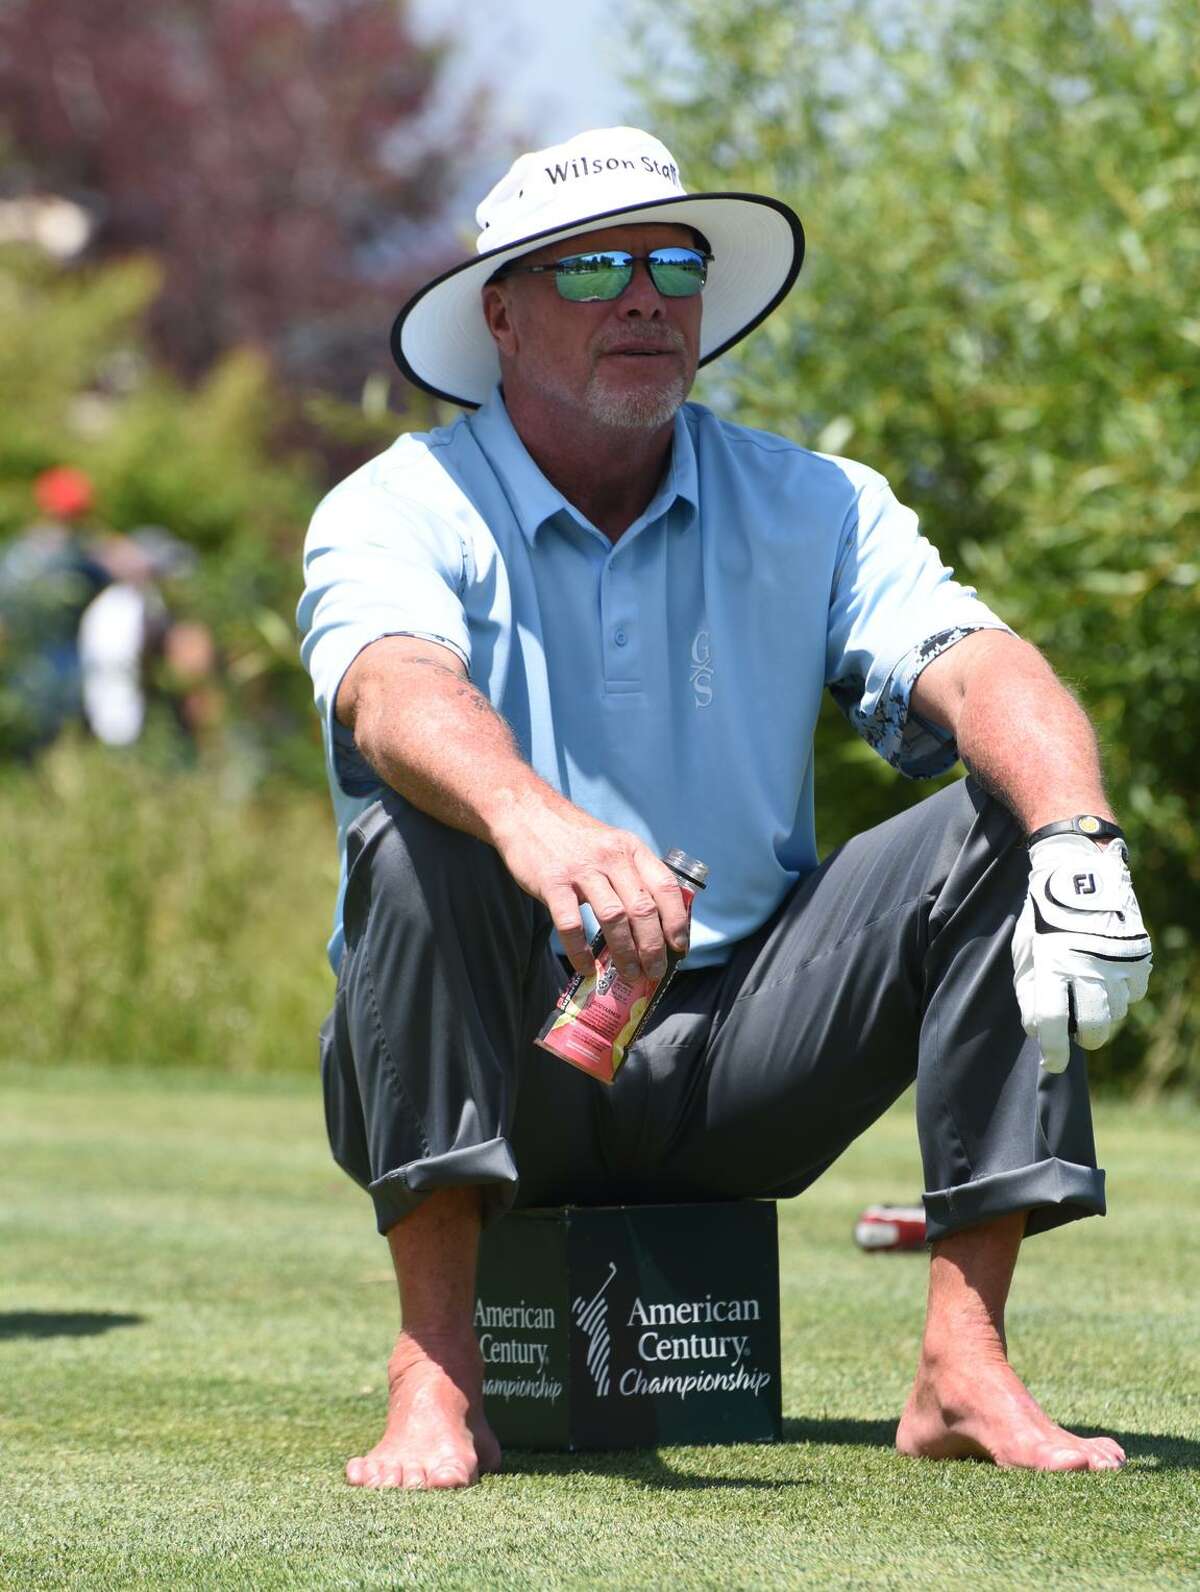 A barefoot Jim McMahon plays in 60 to 70 celebrity golf tournaments a year.